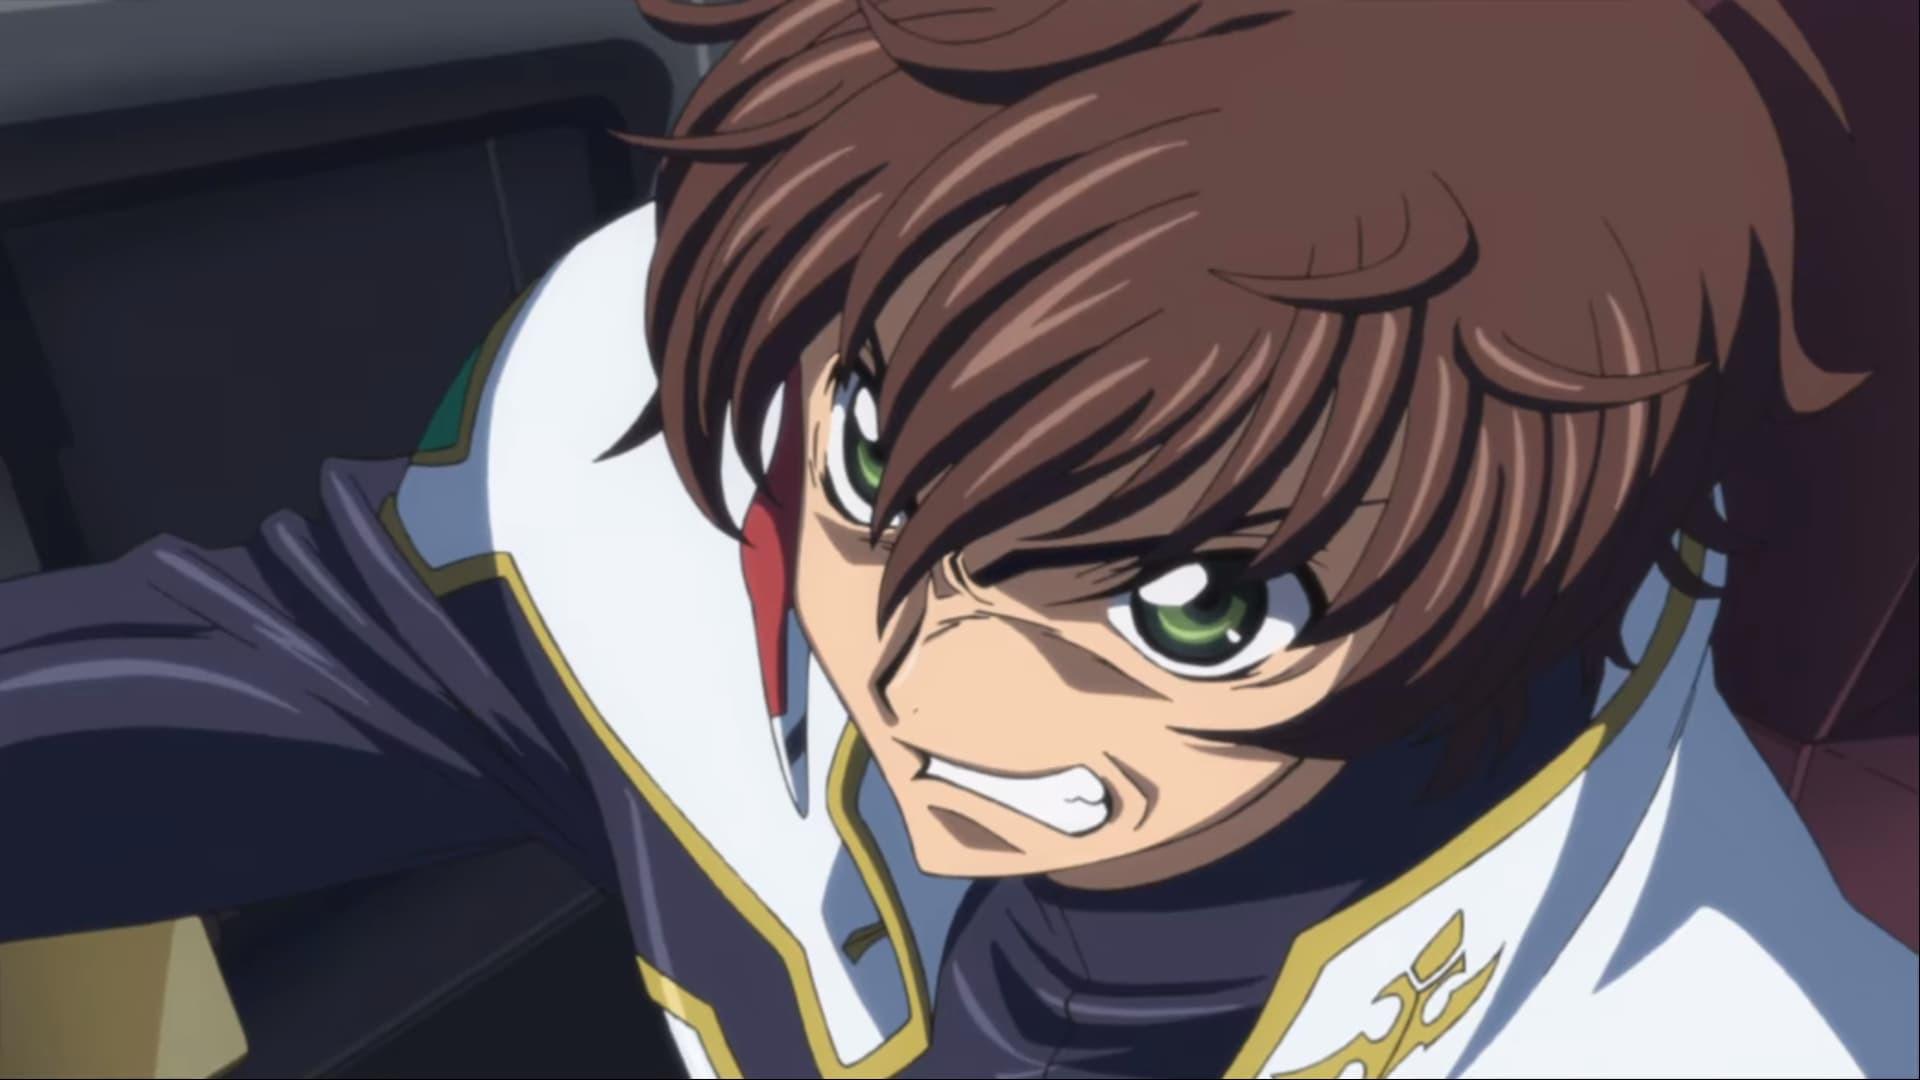 Code Geass: Lelouch of the Rebellion – II. Transgression